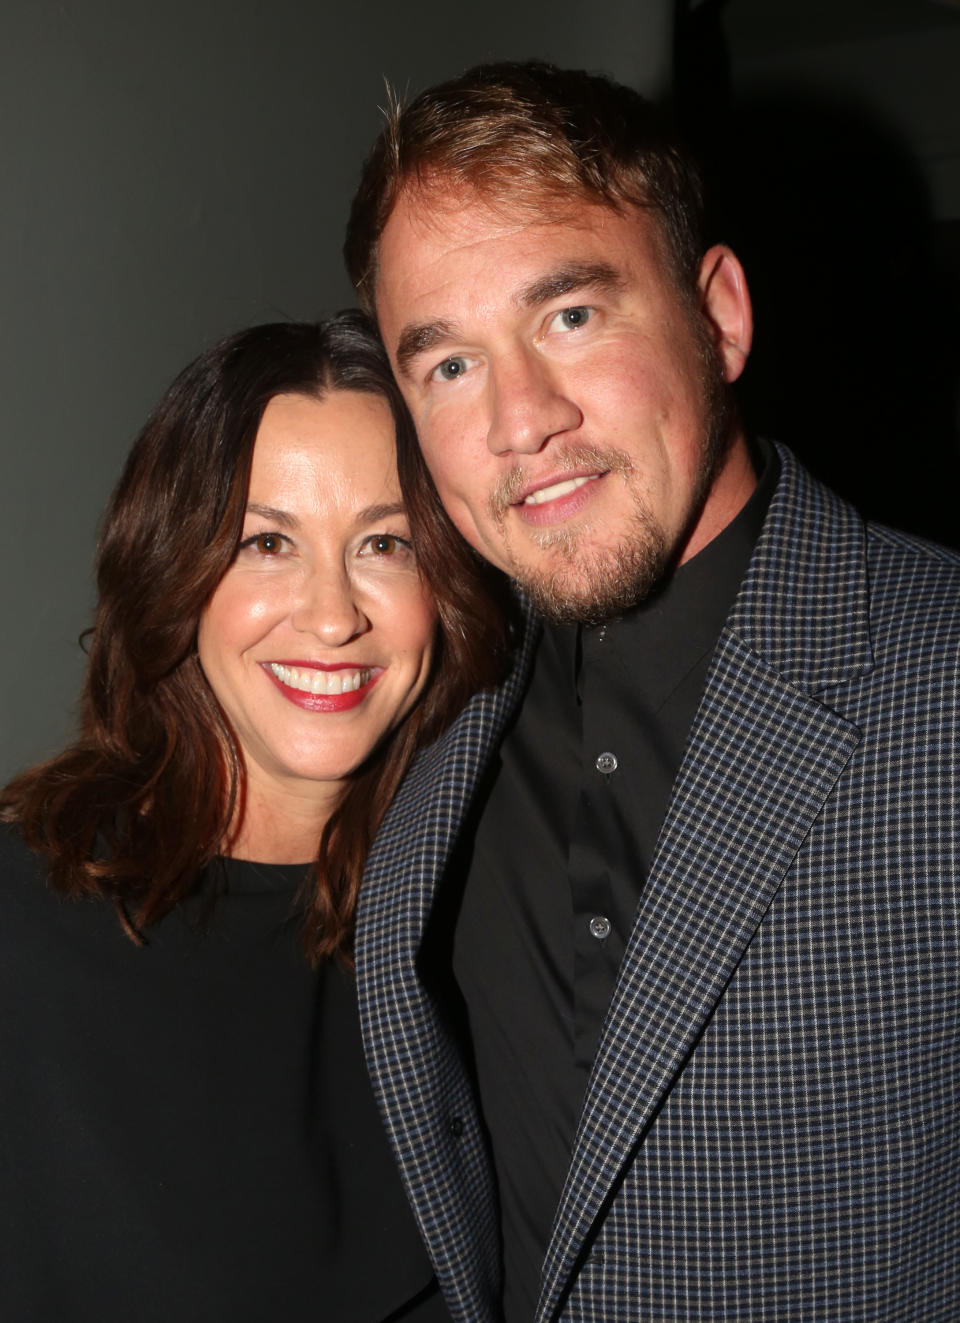 Alanis Morissette and husband Mario “Souleye” Treadway pose at the opening night of the new Alanis Morissette musical 